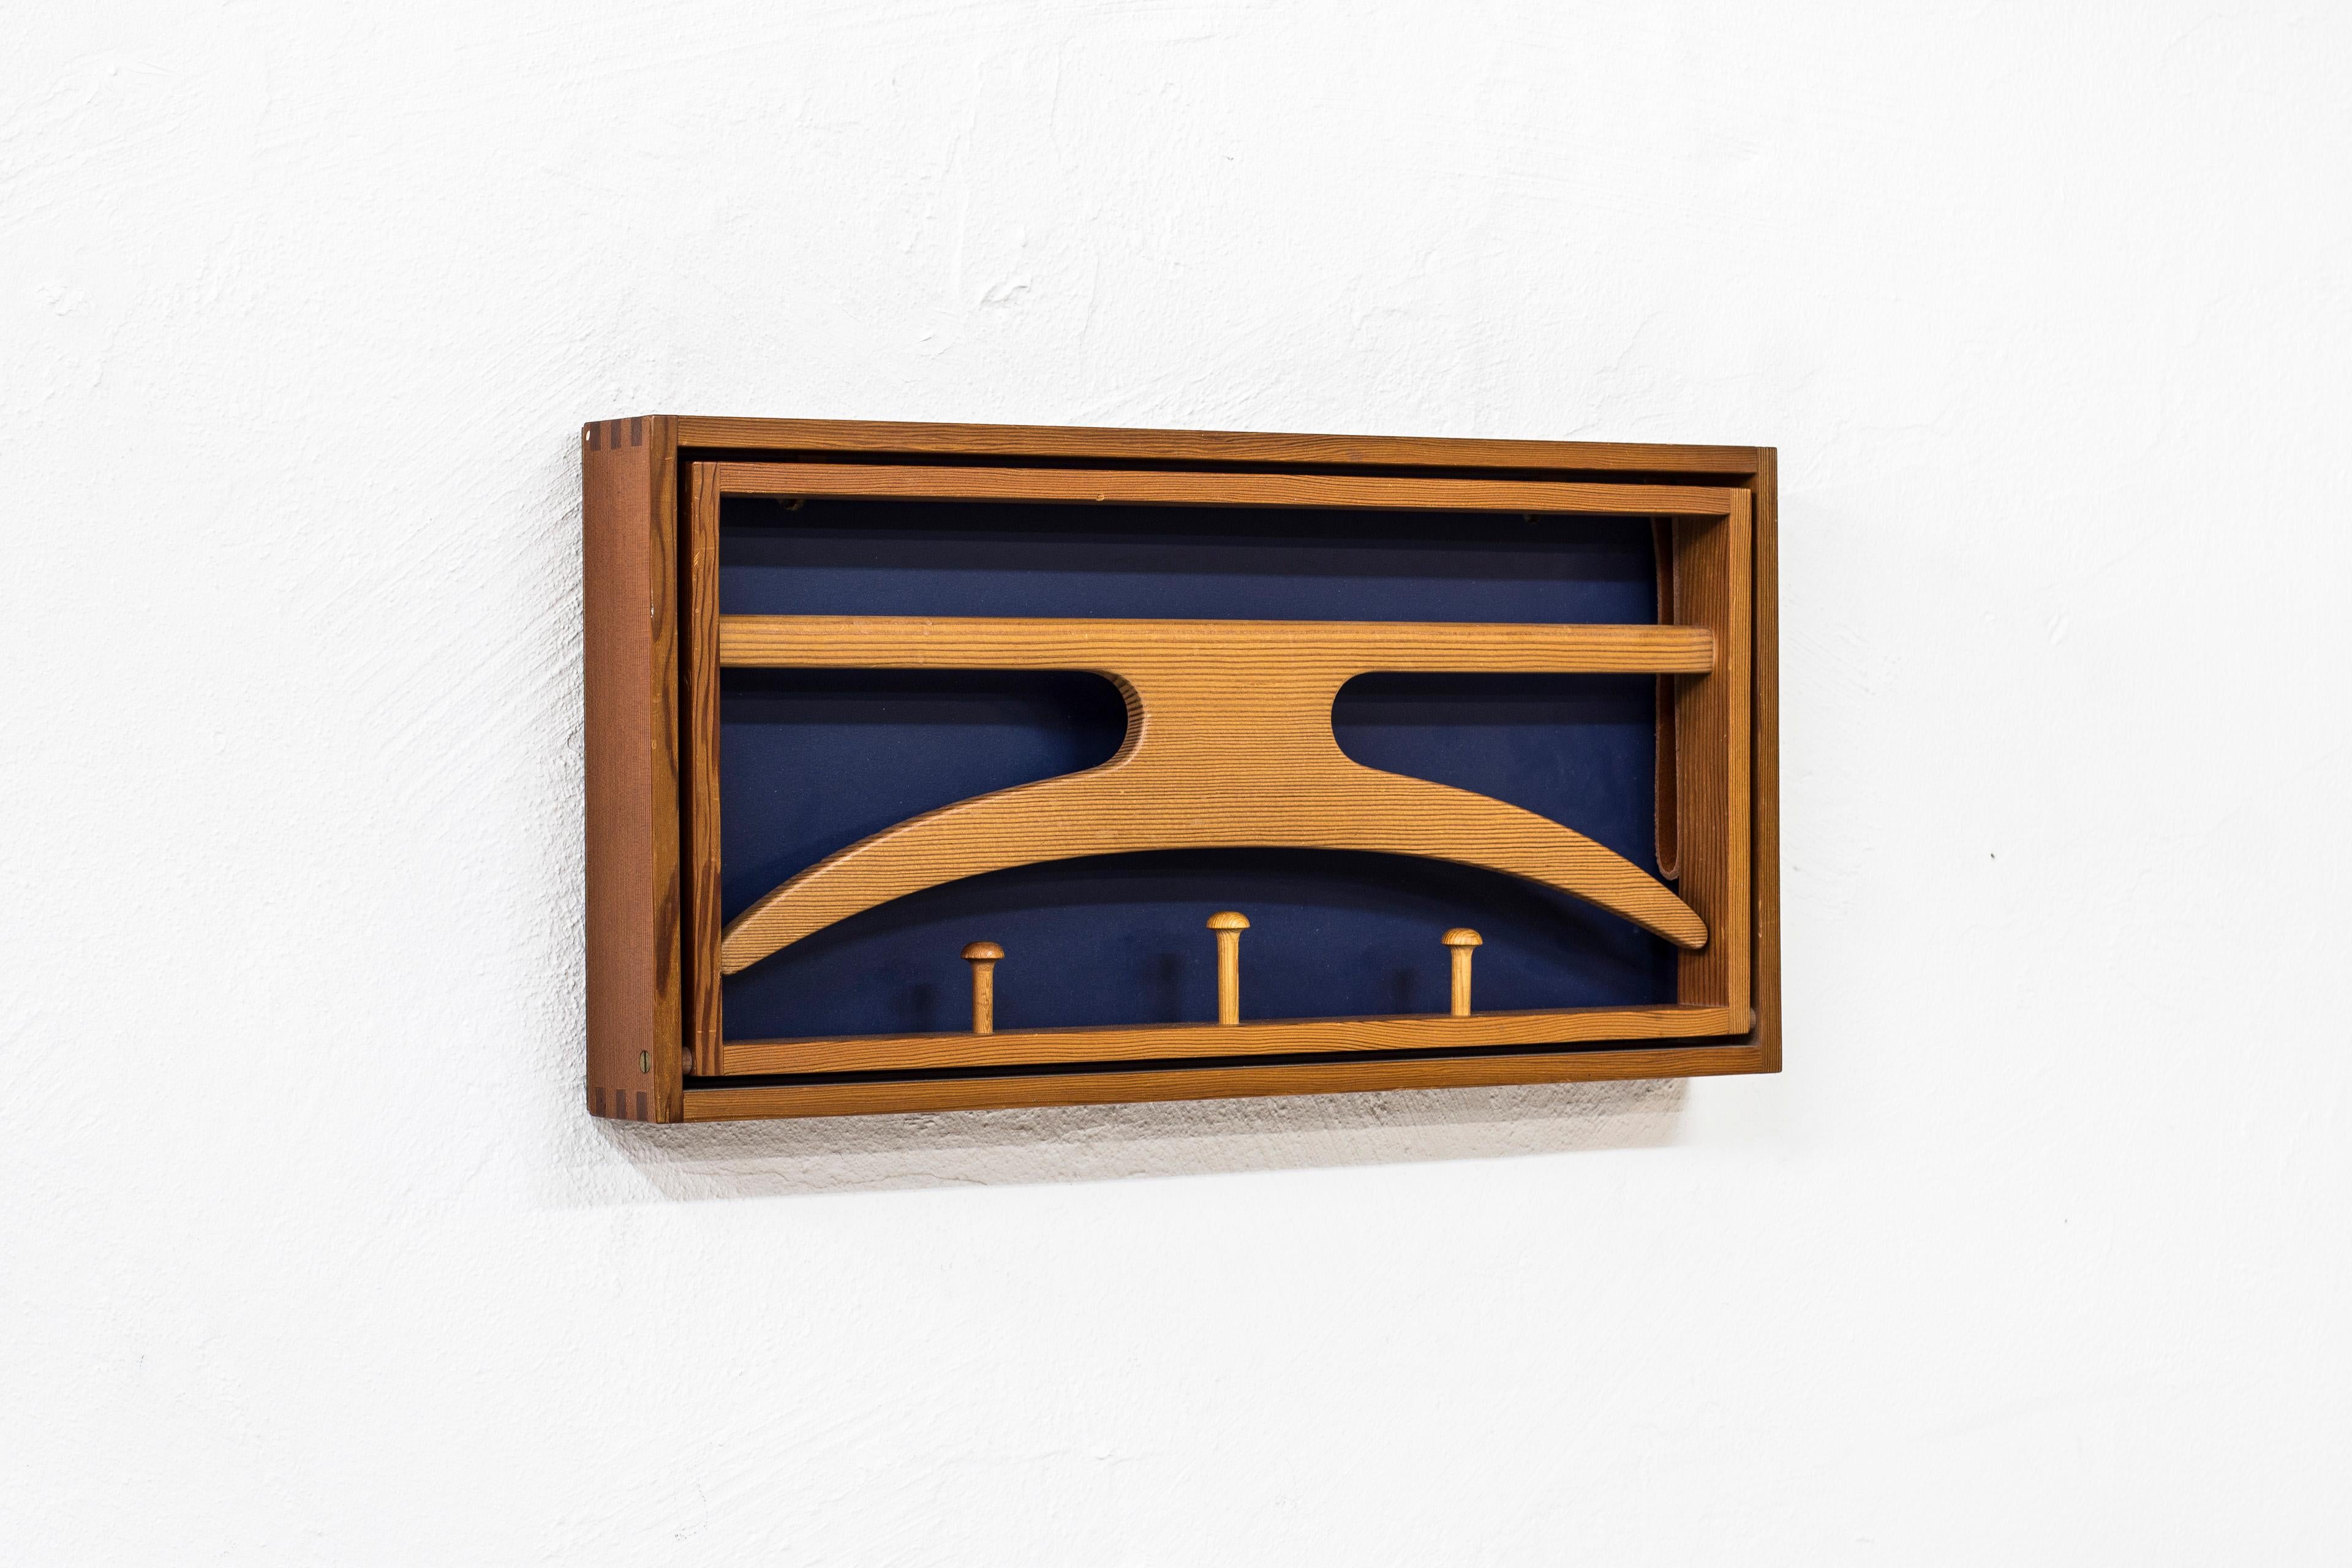 Wall-mounted valet designed by Adam Hoff & Poul Østergaard. Produced in Denmark during the late 1950s by Virum Møbelsnedkeri. Solid Oregon pine frame with visible joinery, leather straps and blue lacquered back part. Very good condition with light